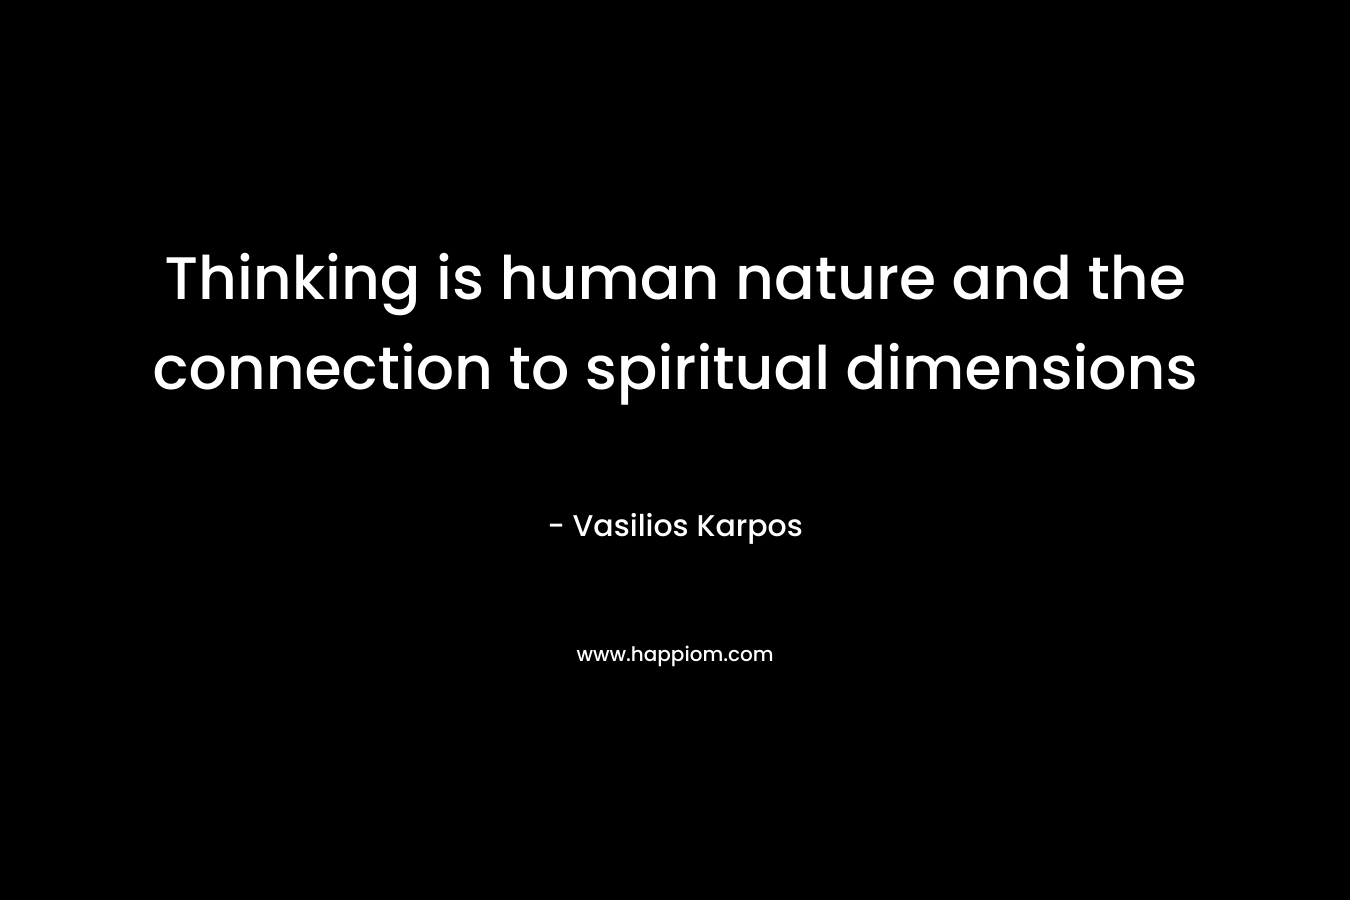 Thinking is human nature and the connection to spiritual dimensions